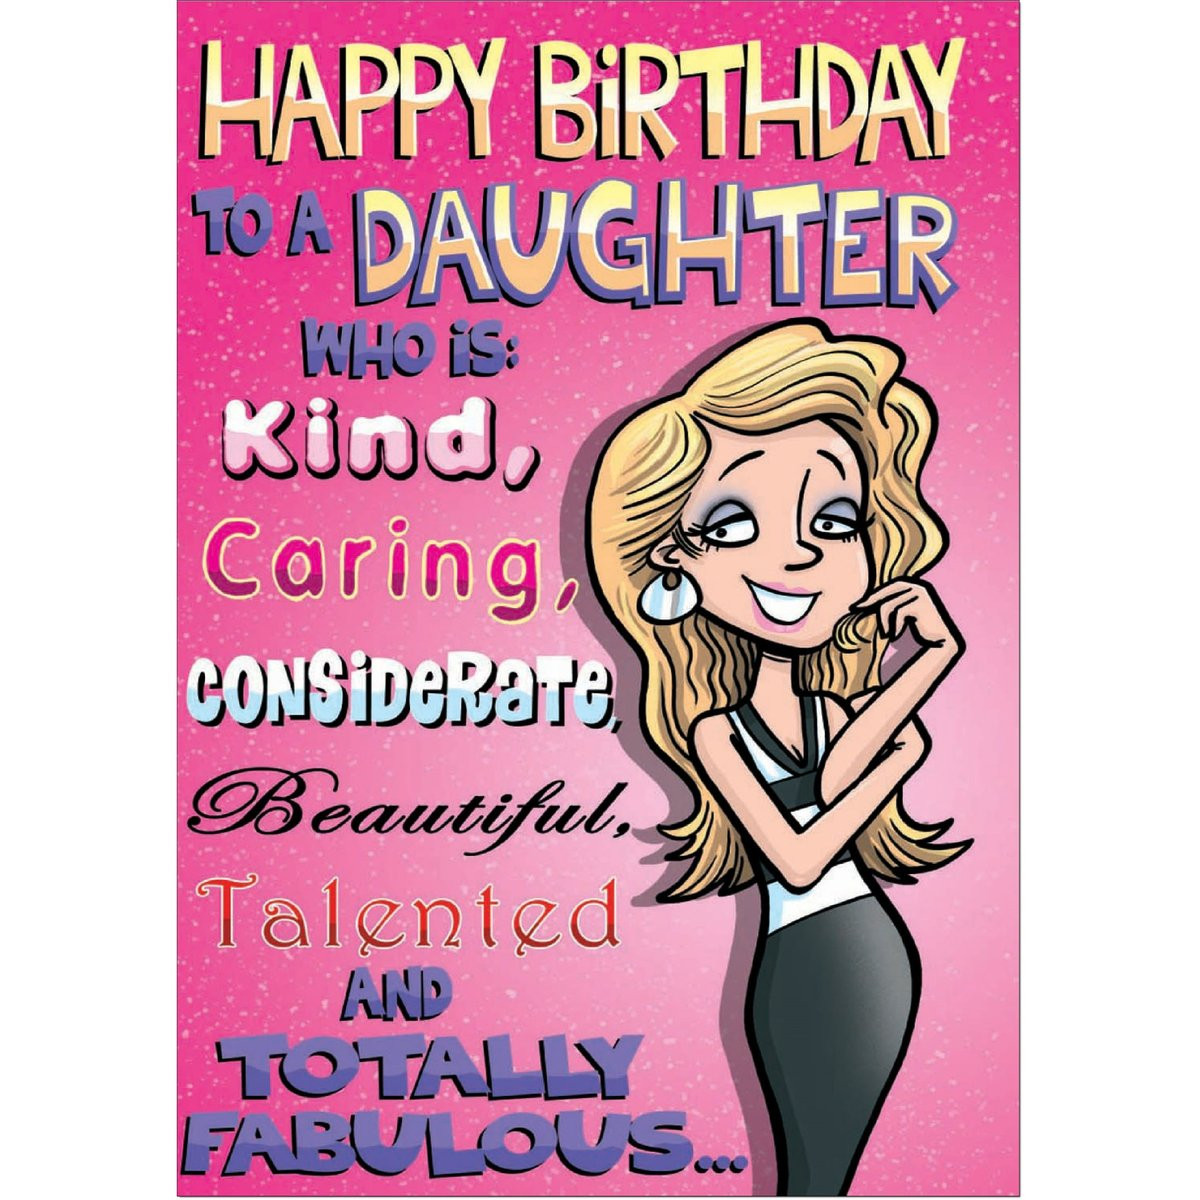 Funny Birthday Cards For Daughter
 Doodlecards Funny Daughter Birthday Card Medium